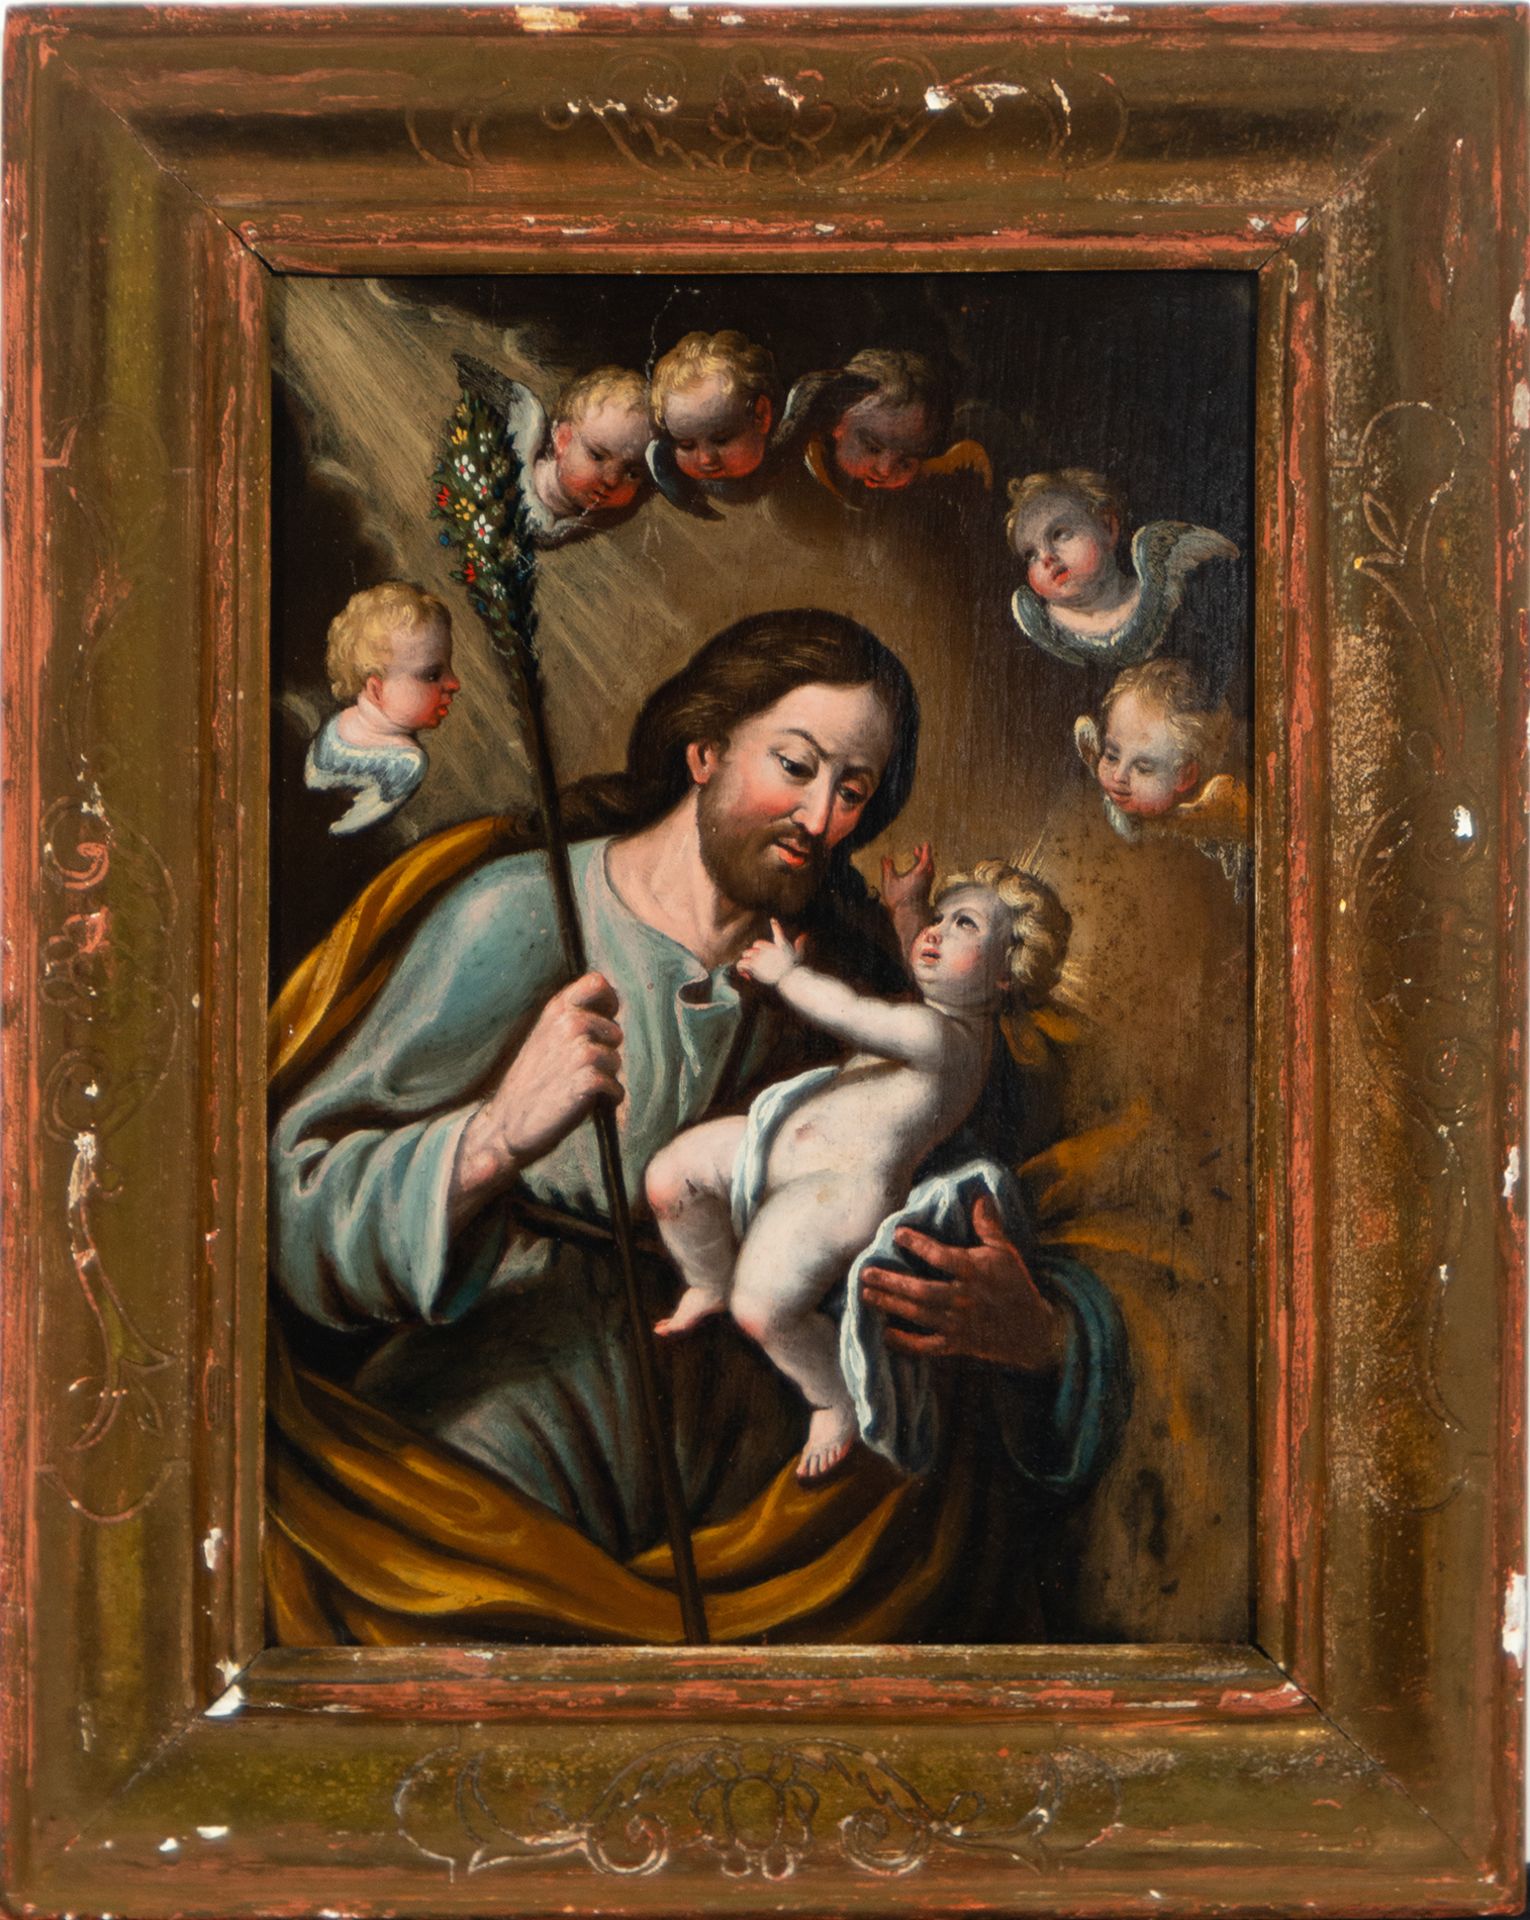 Saint Joseph with the Child in his arms, Andalusian school of the 18th century